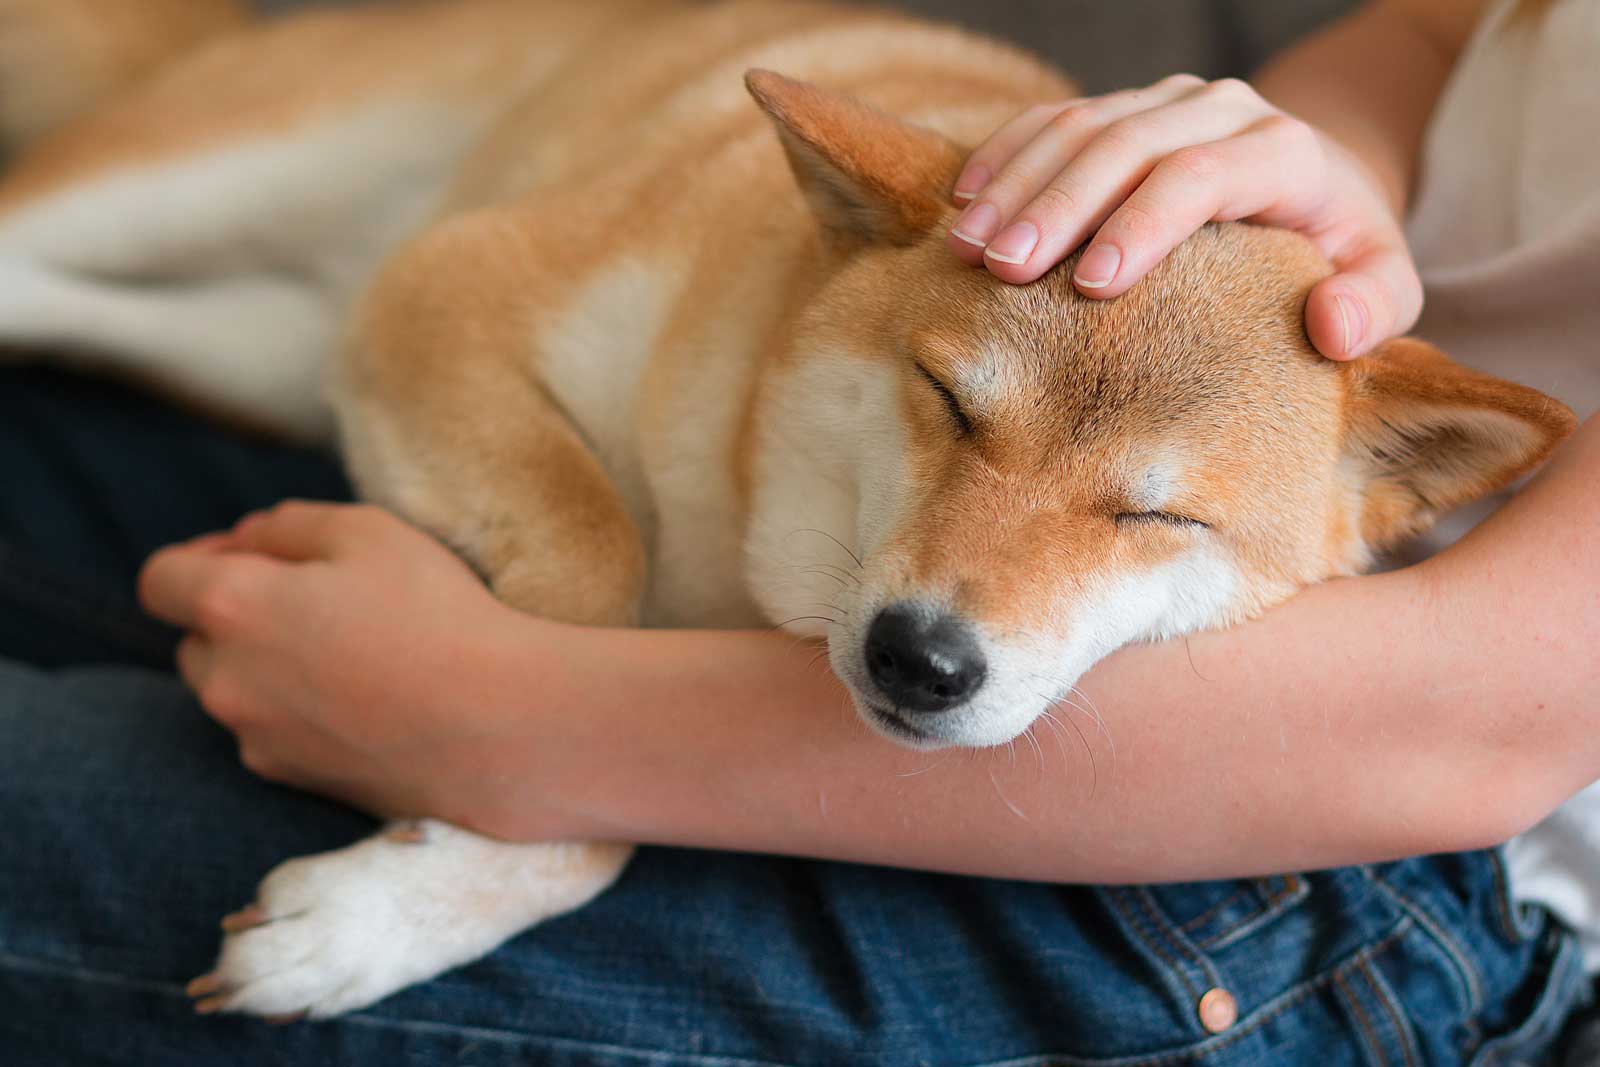 A woman petting a cute red dog Shiba inu, sleeping on her lap. Close-up. Trust, calm, care, friendship, love concept.